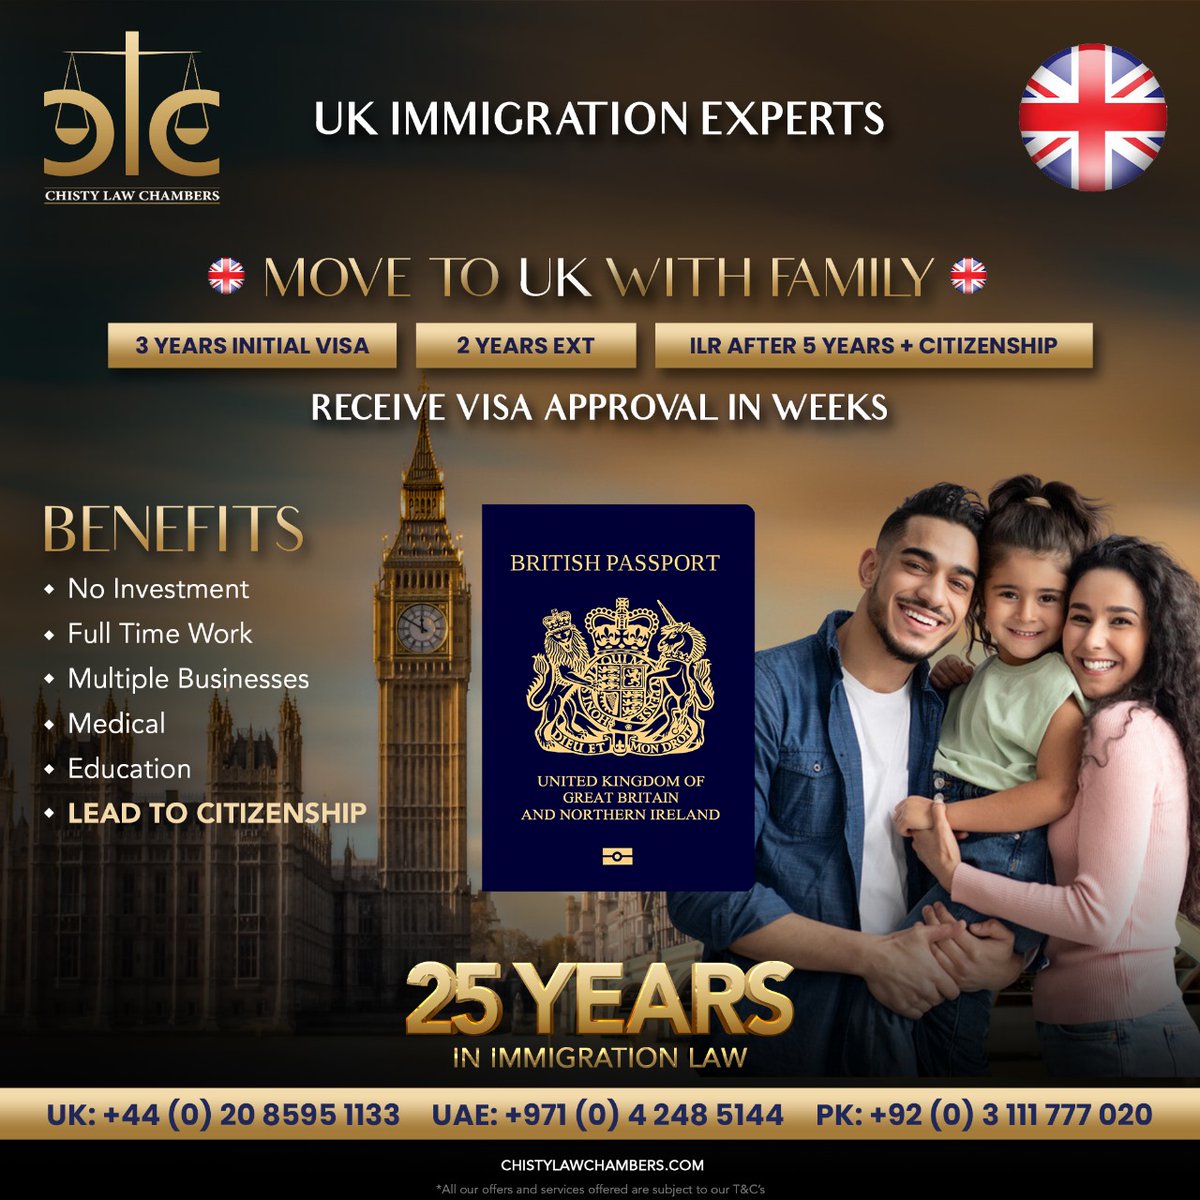 Move to UK with Family

3 Years Initial Visa
2 Years Ext
ILR After 5 Years + Citizenship

Receive Visa Approval in Weeks

No Investment
Full-Time Work
Multiple Businesses
Medical
Education 
Lead to Citizenship

#UKwithFamily #uklifestyle #fulltimework #ukcitizenship #ILR